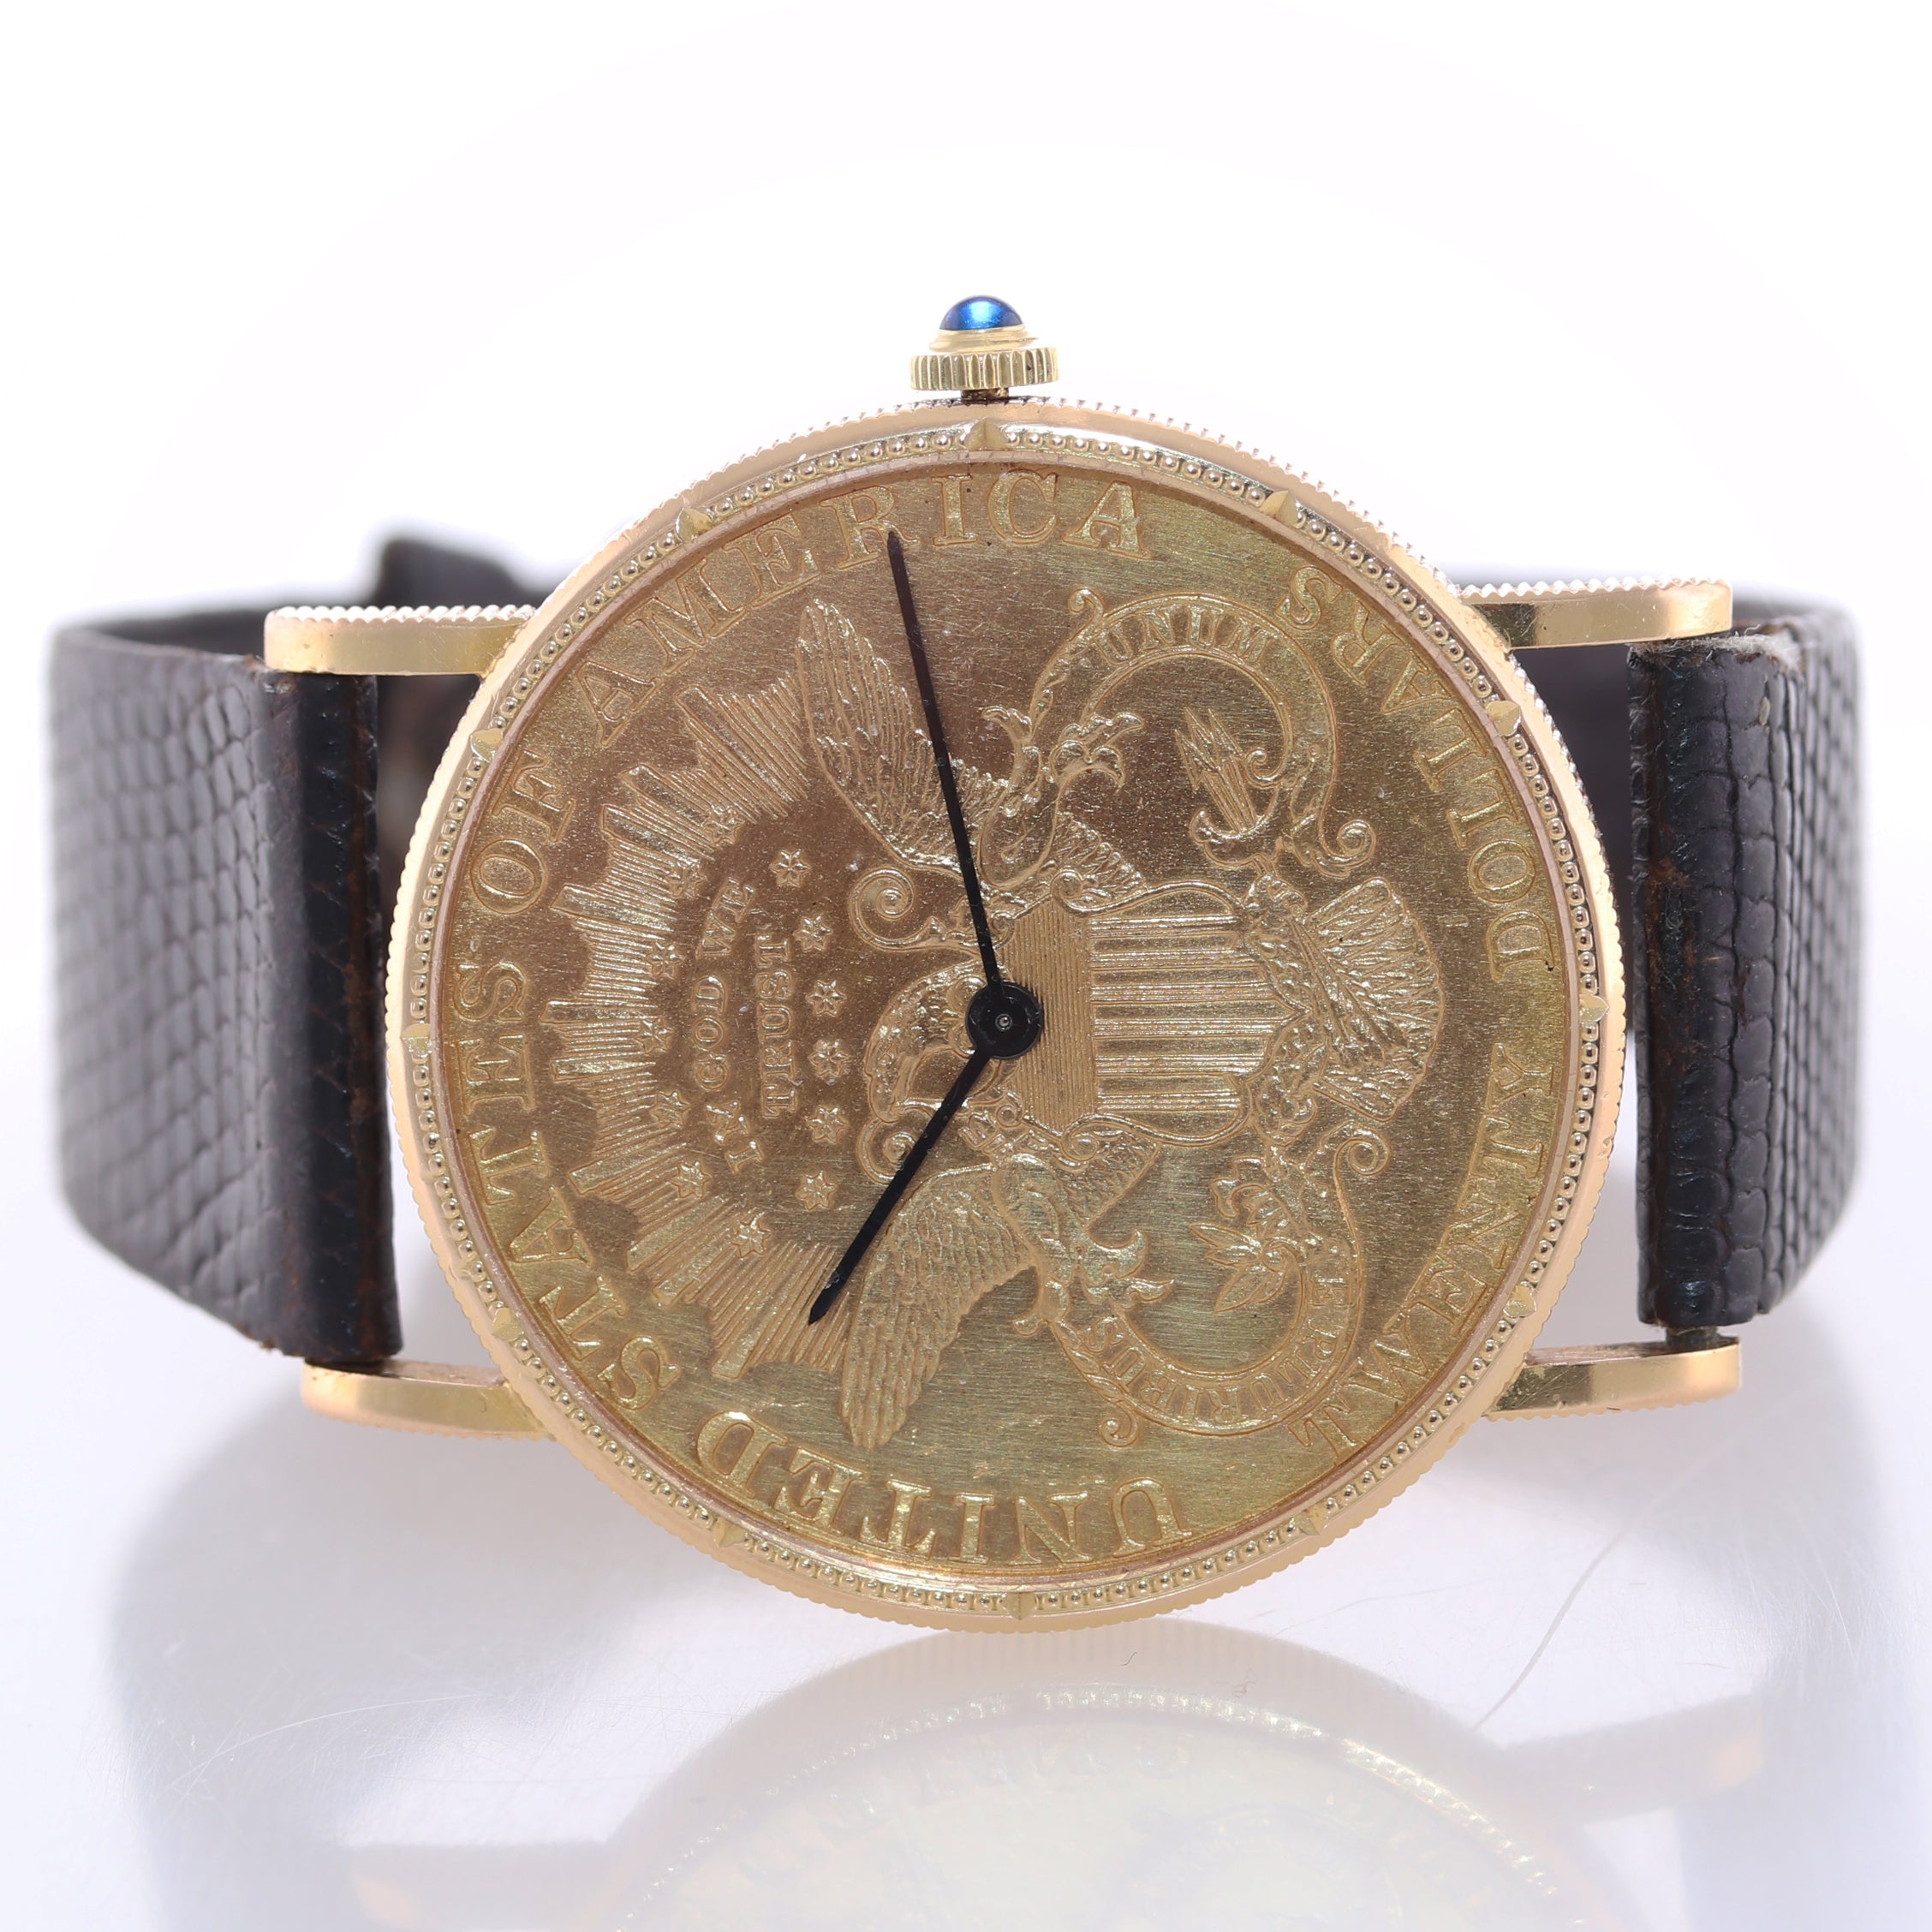 VTG Corum $20 American Eagle 22k Yellow Gold Coin 18k 35mm Manual Wind Watch